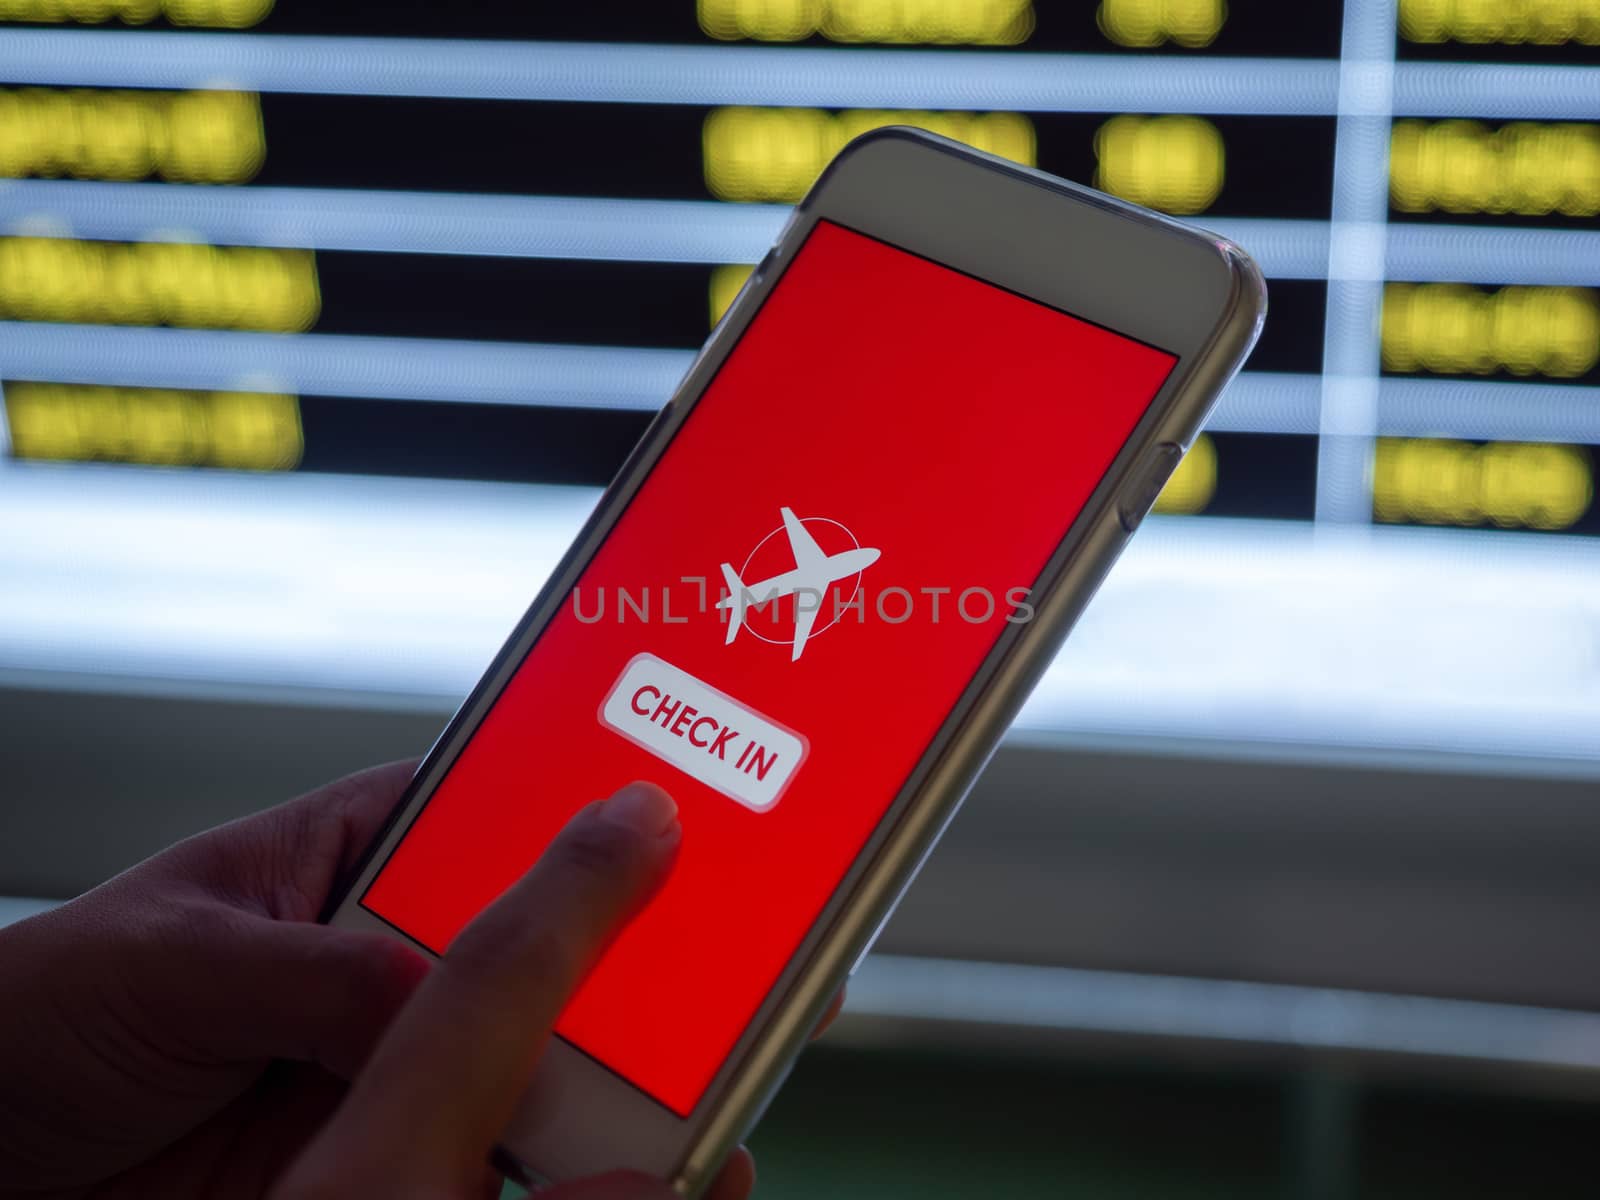 Flight check-in by mobile phone. Hand touching on smartphone screen to check-in for a flight in front of flight schedule board information background in airport.